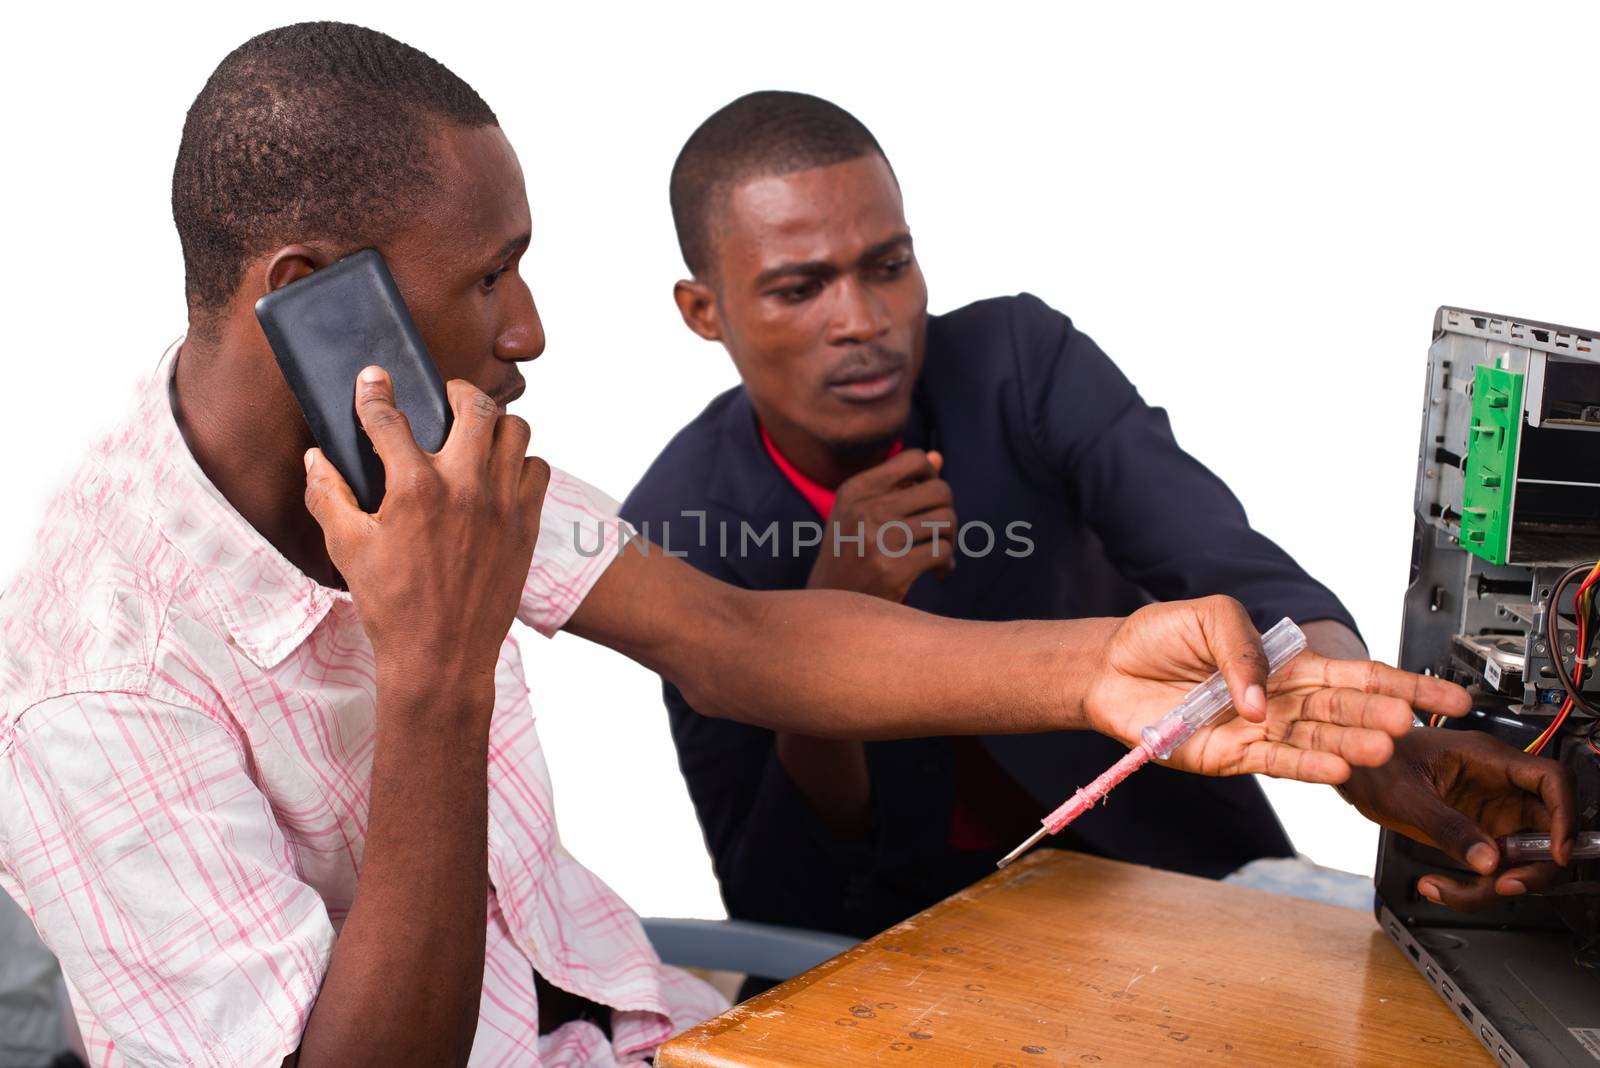 young computer technician talking on the phone and repairing a computer in front of an instructor